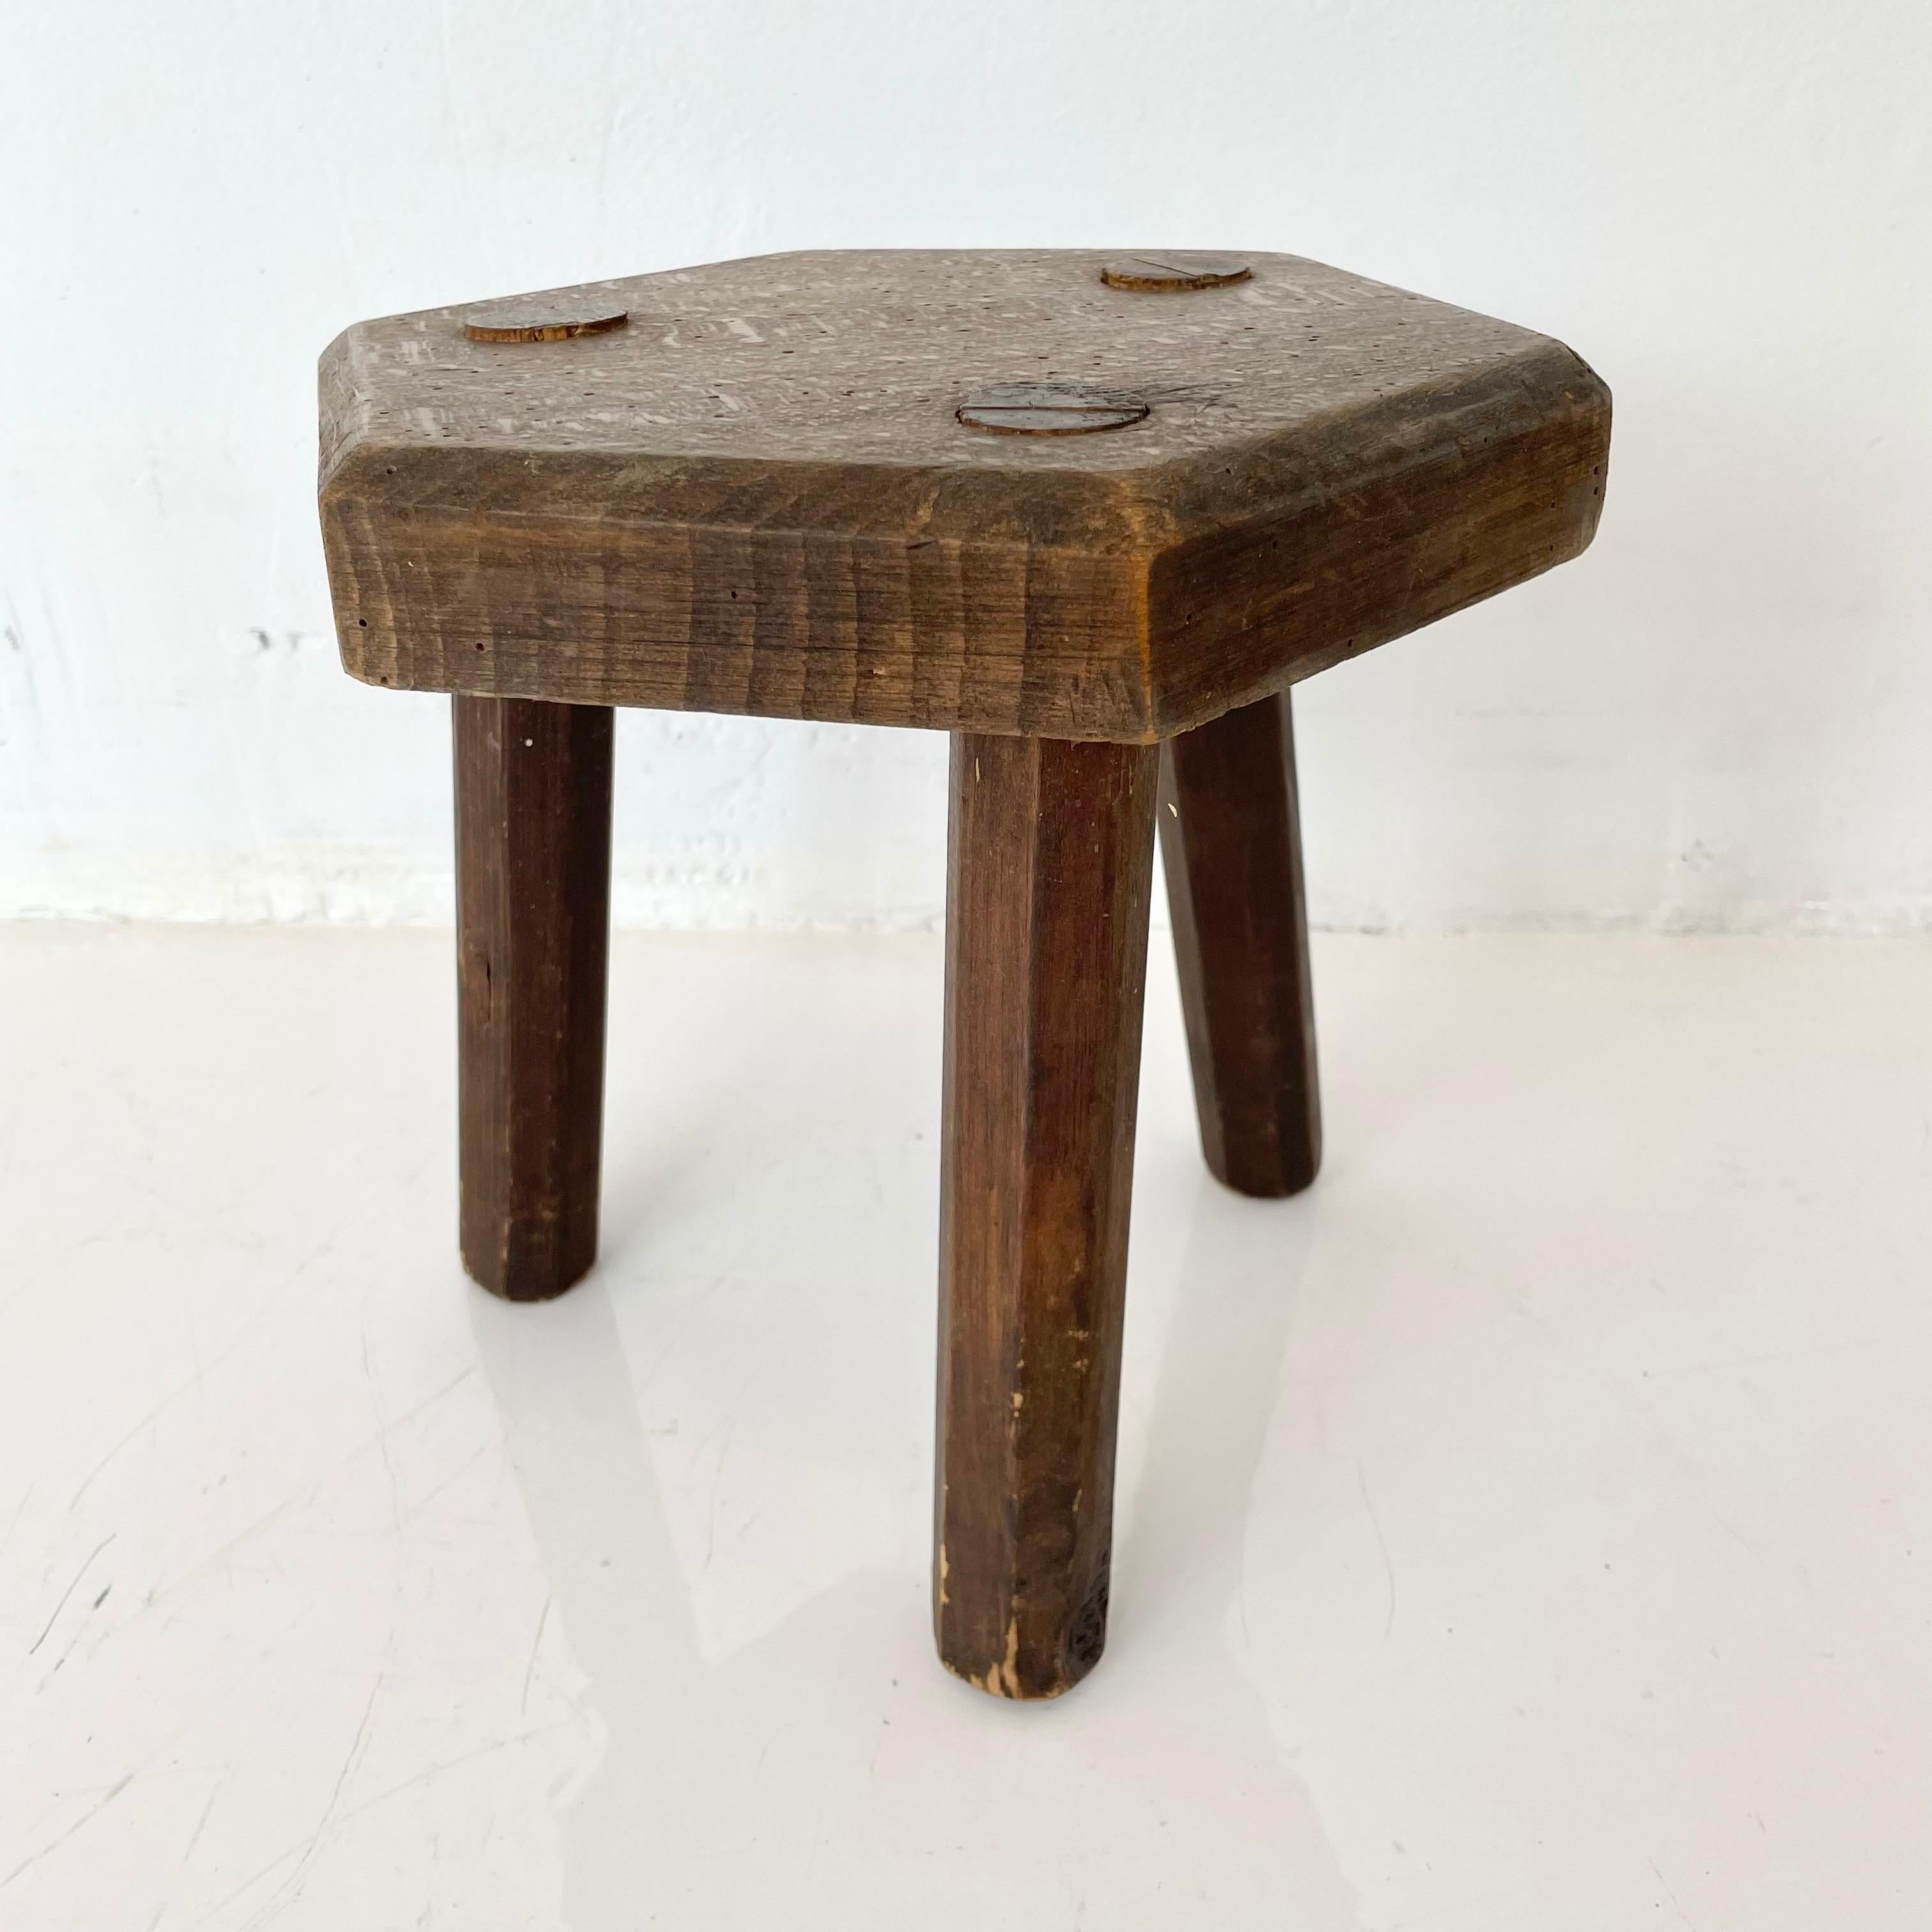 Stubby wooden hexagonal stool, made in France, circa 1950s. Thick seat with three rounded legs. No nails or hardware. Great lines and shape. Petite stool with great presence. Great vintage condition. Perfect for books or objects. 
     